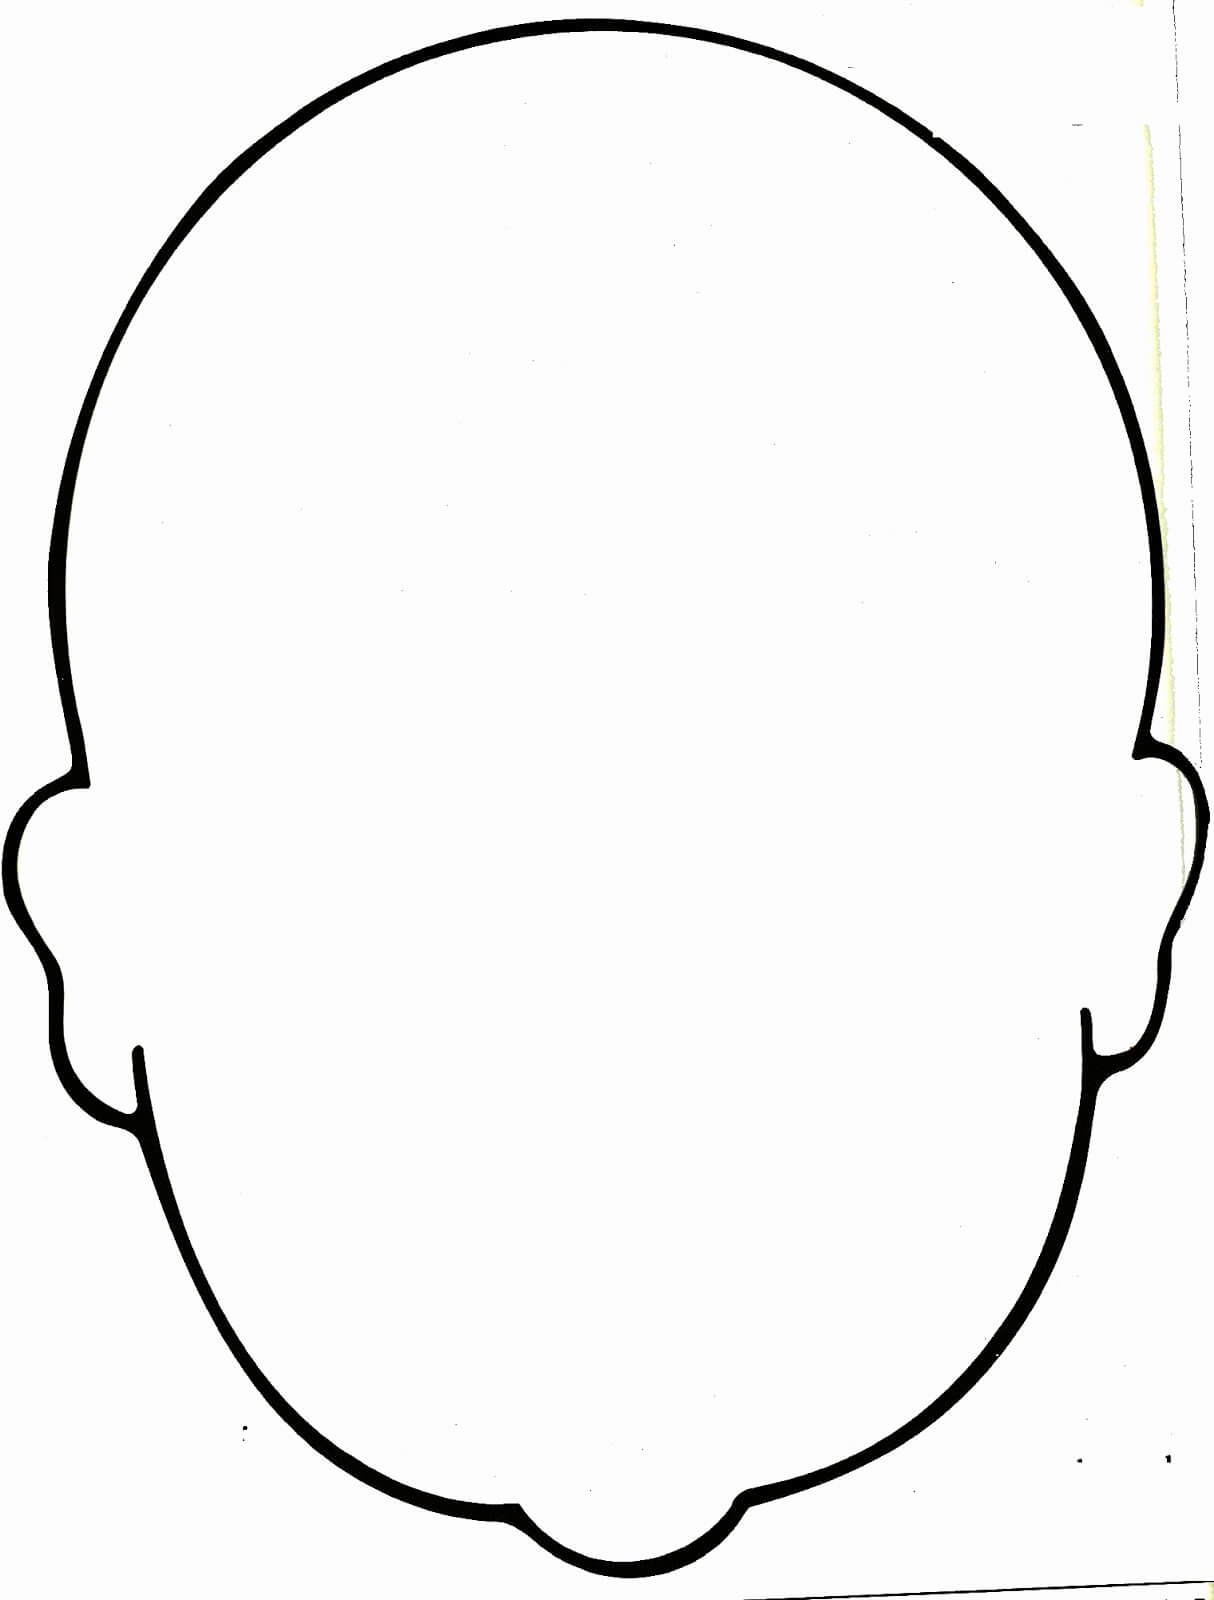 Blank Face Coloring Page Lovely Image Result For Blank Faces Intended For Blank Face Template Preschool